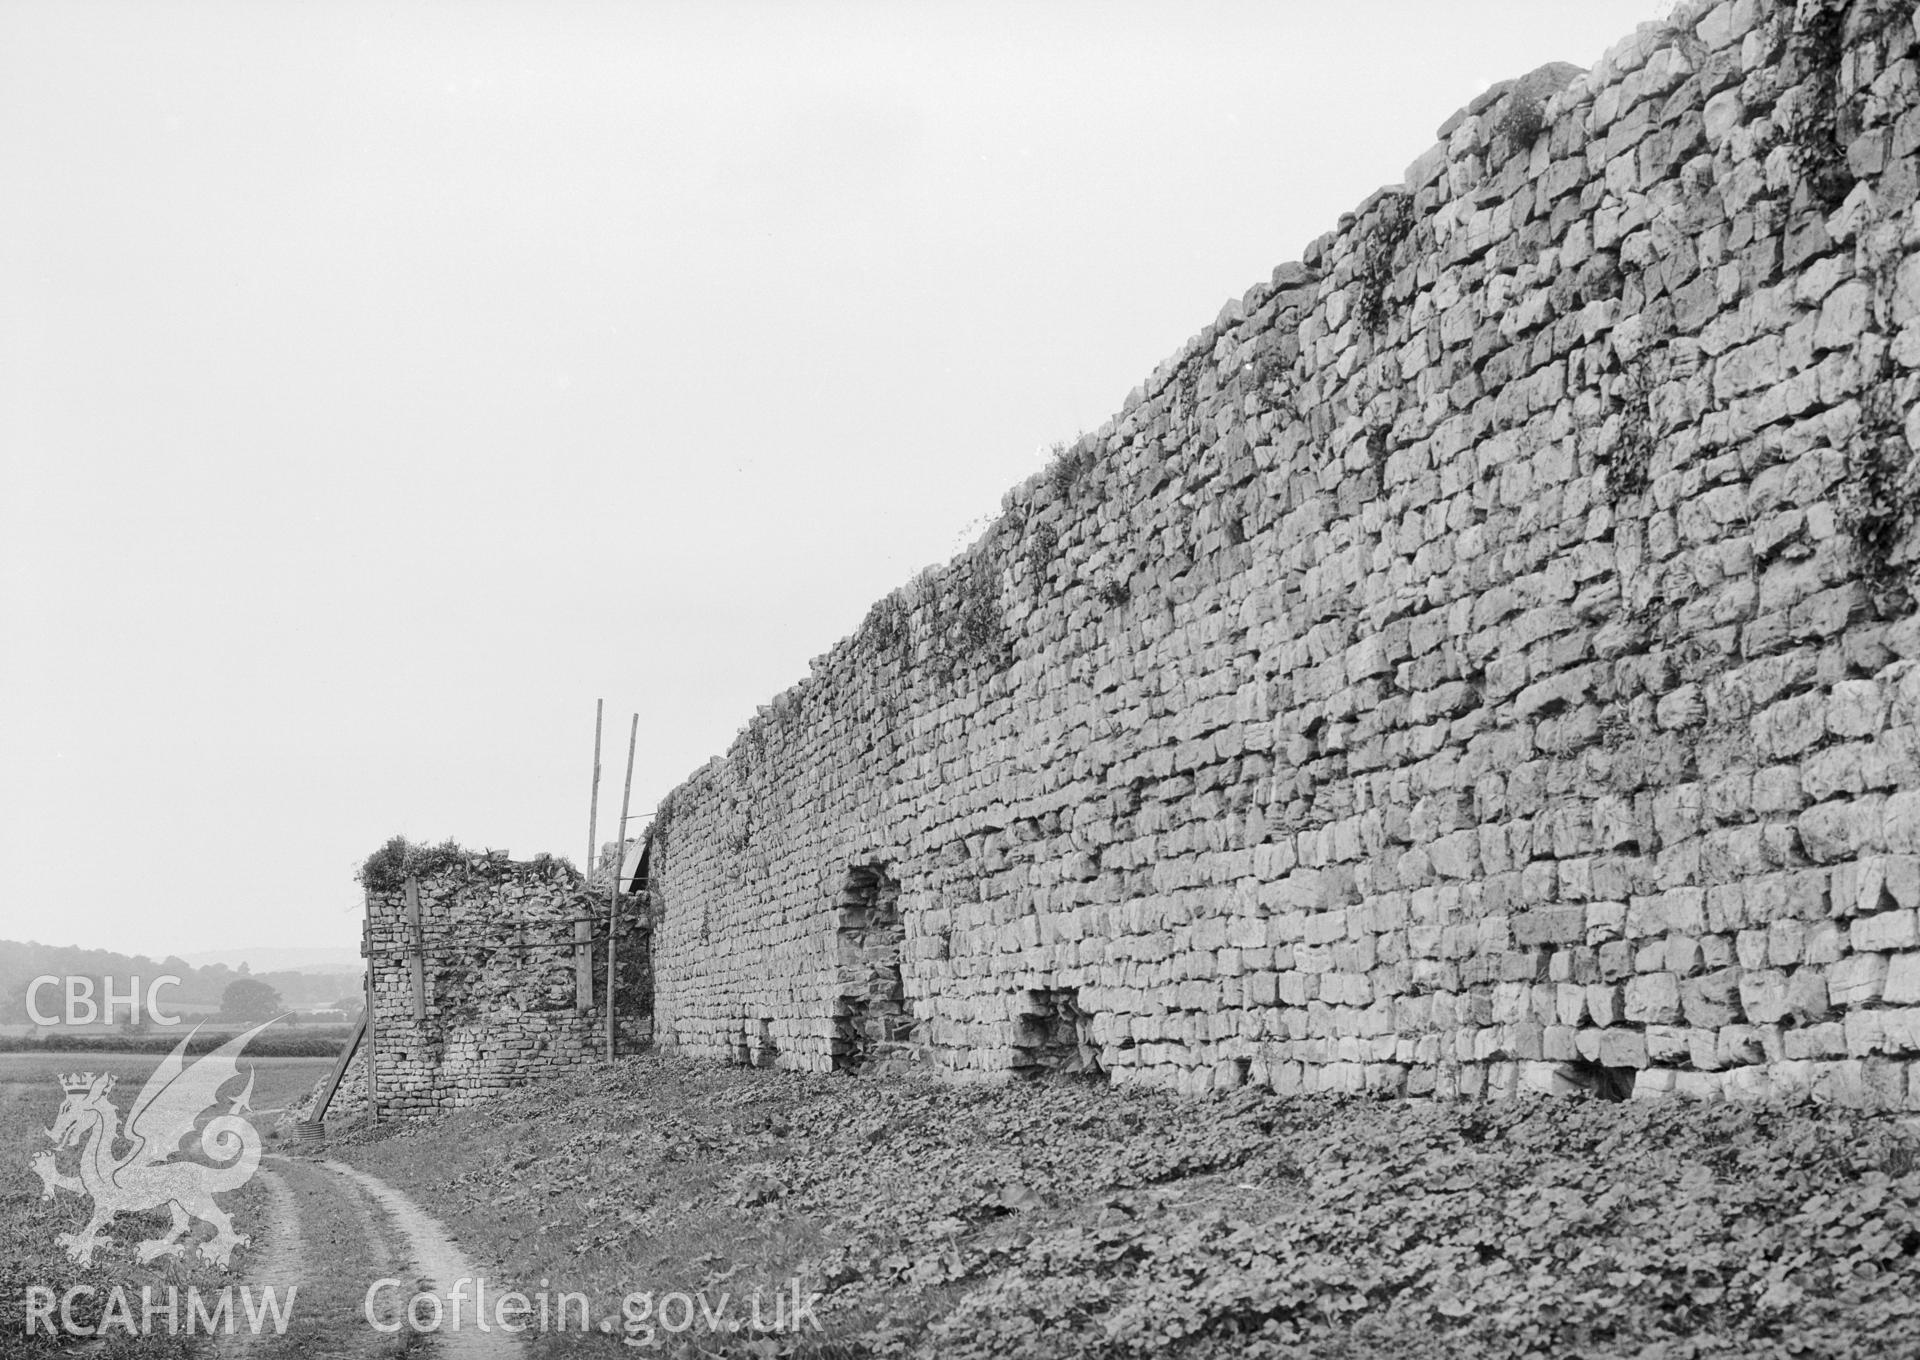 View of south wall of Caerwent Roman City